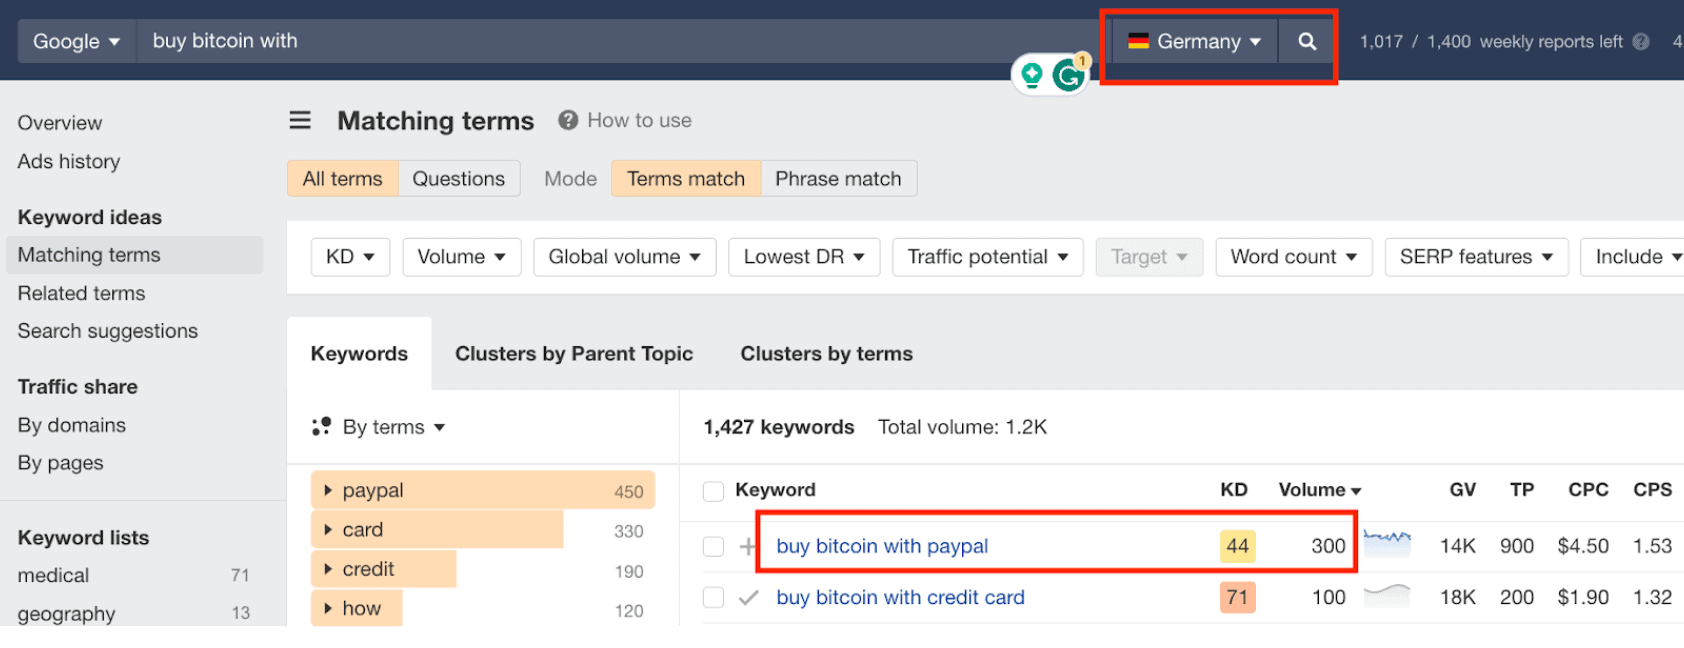 “buy Bitcoin with PayPal” keyword analysis in Germany